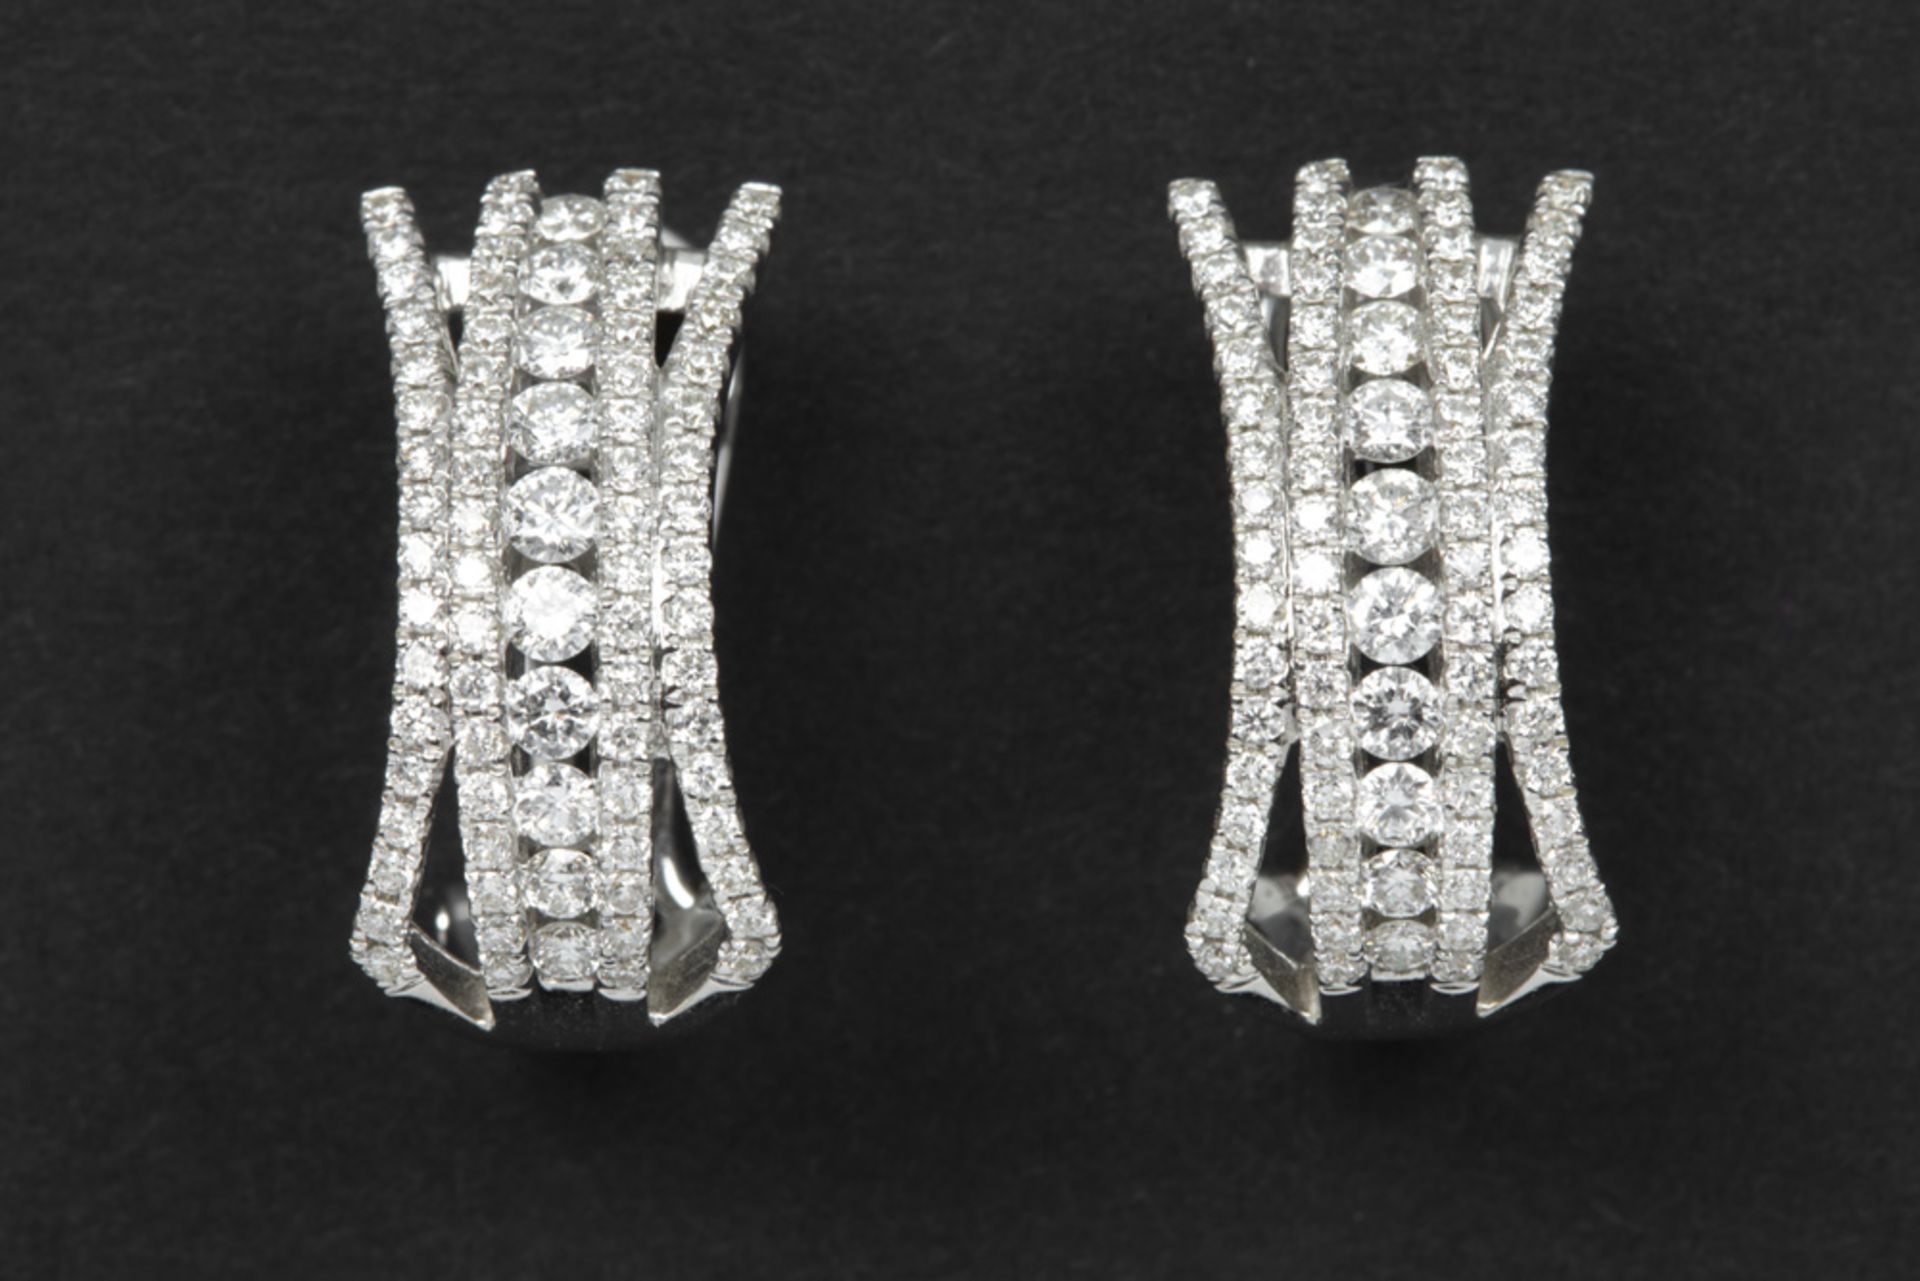 pair of elegant earrings in white gold (18 carat) with at least 1,40 carat very high quality